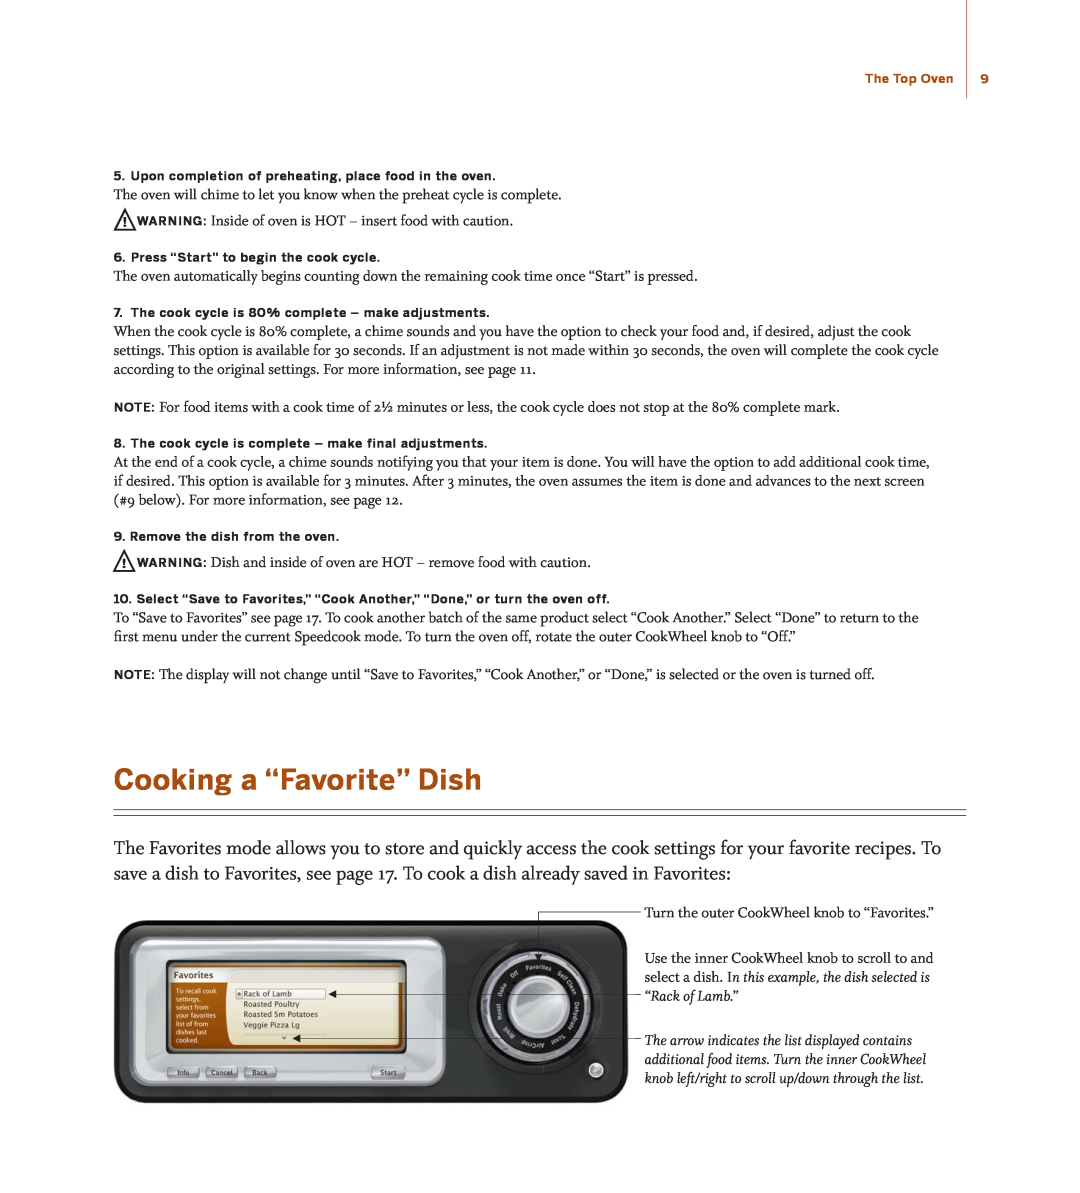 Turbo Chef Technologies TD030*240 manual Cooking a “Favorite” Dish, Upon completion of preheating, place food in the oven 